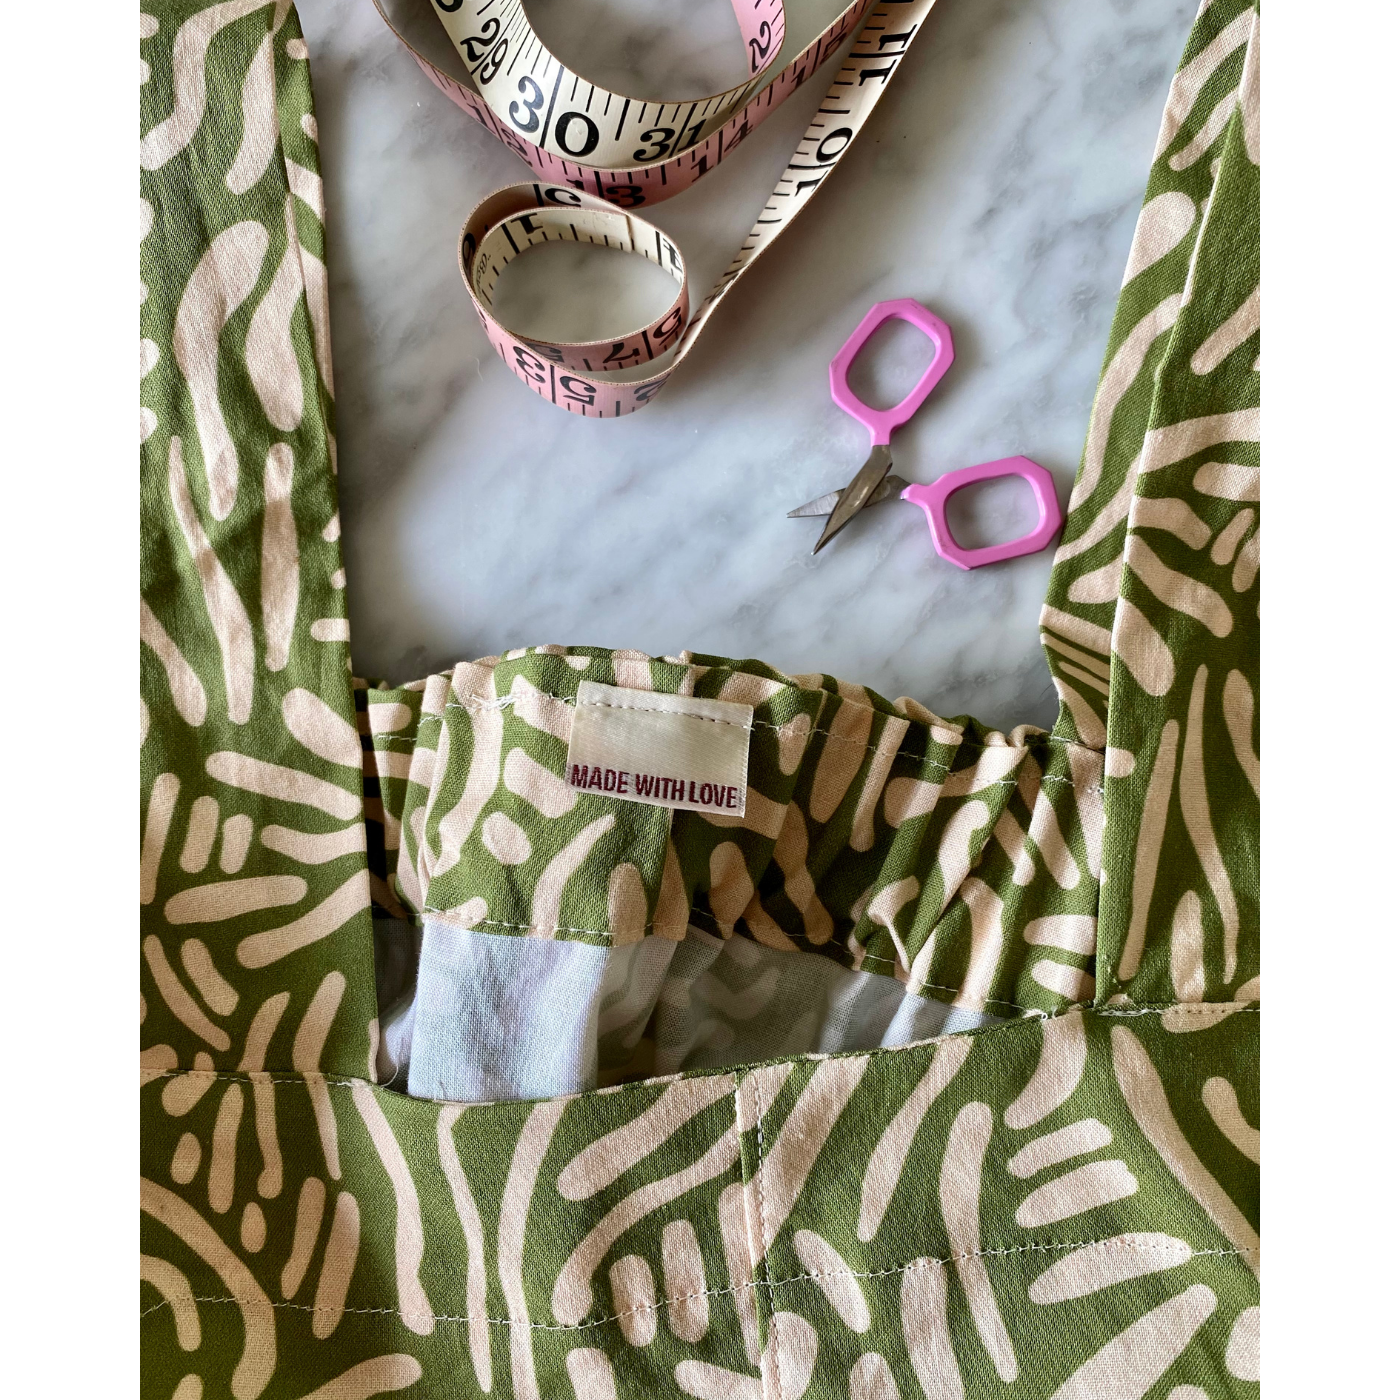 A close up of the inside neckline and top of a maxi dress laying on a white-and-gray surface with an olive green background and short wavy white lines running through the design in all directions. The neckline has a small tag that says “Made with Love.” A pink-and-white measuring tape and small pink scissors are on the table slightly above the dress.